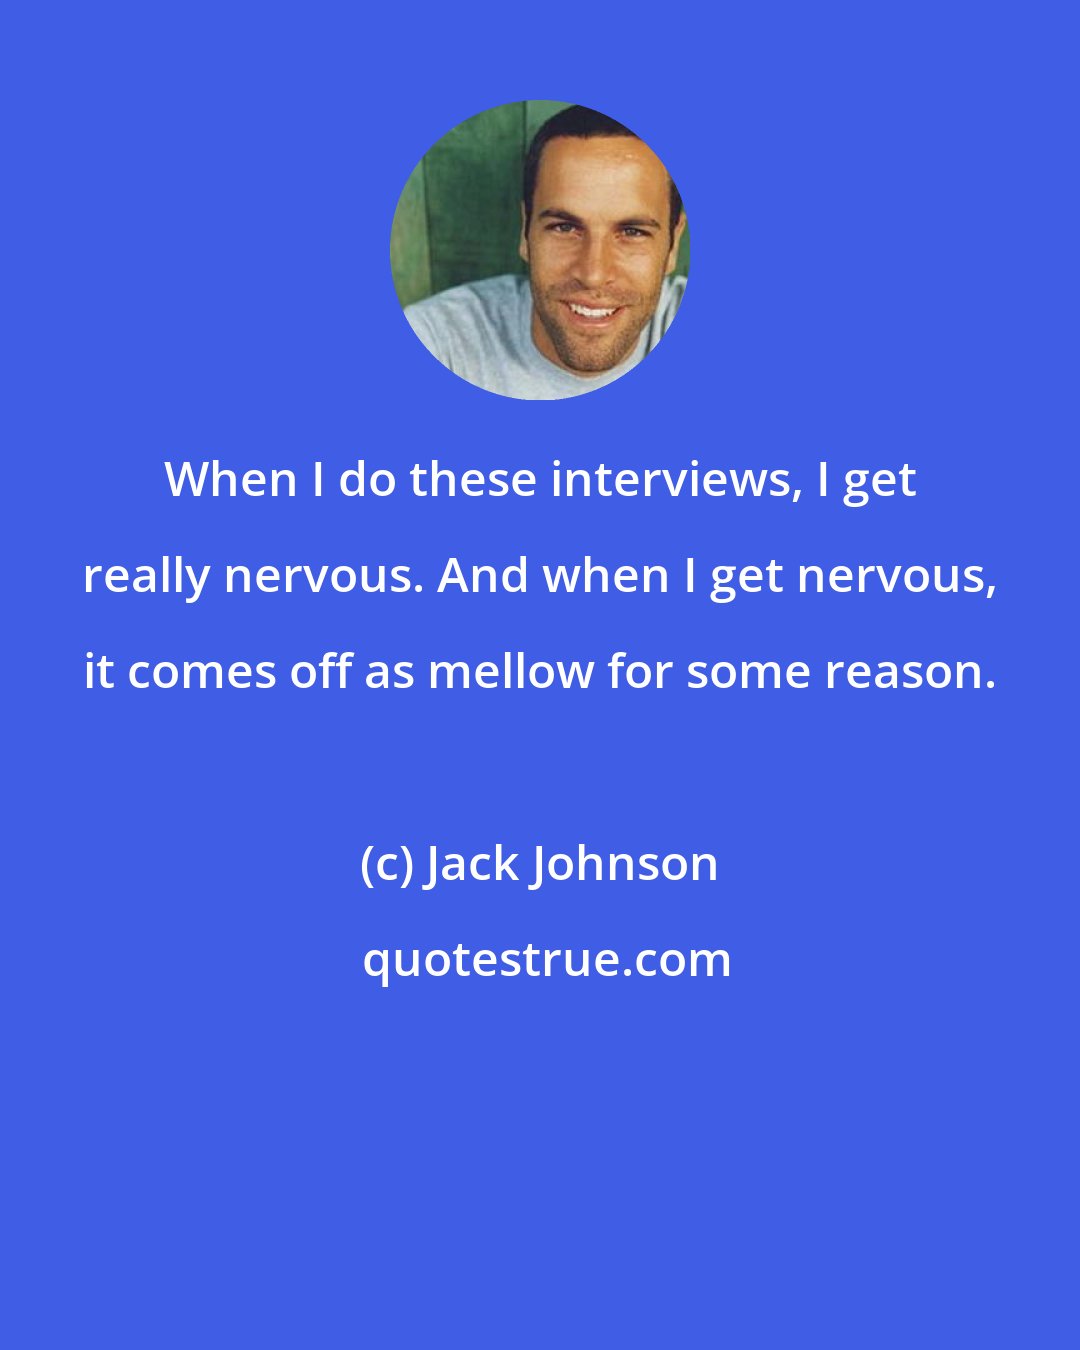 Jack Johnson: When I do these interviews, I get really nervous. And when I get nervous, it comes off as mellow for some reason.